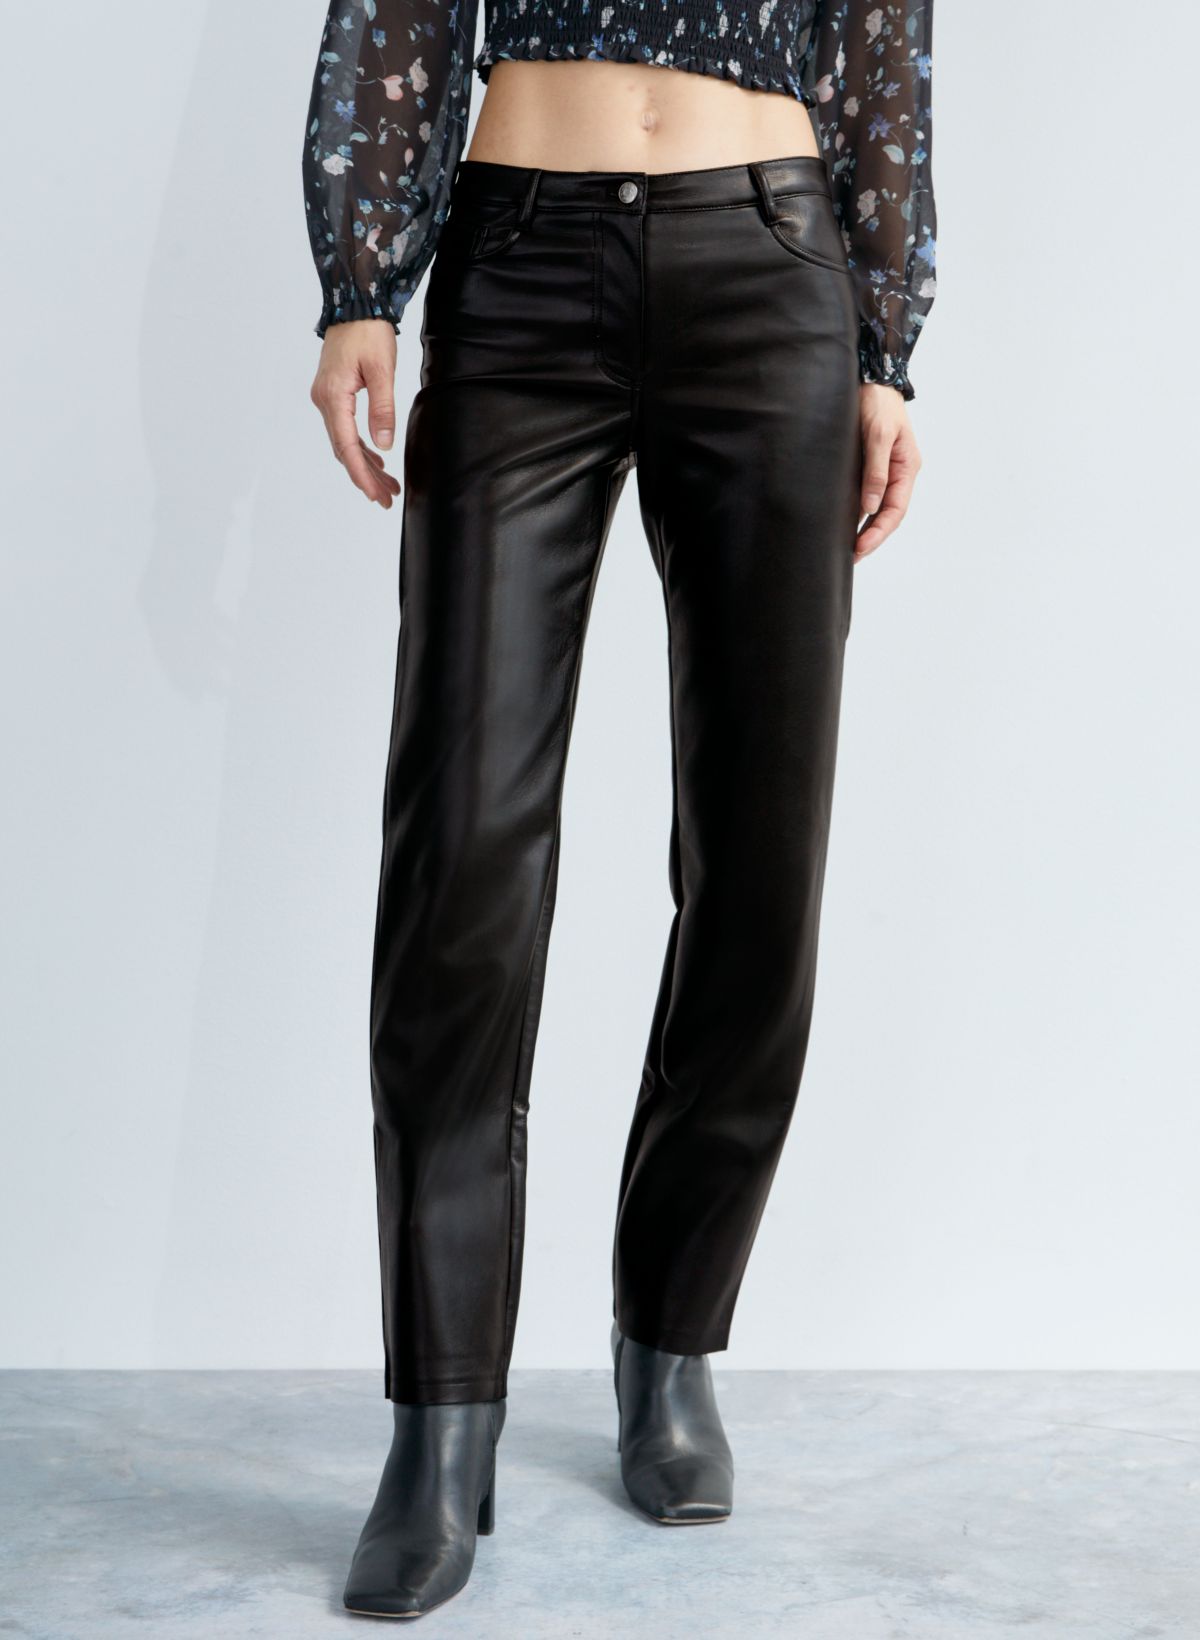 Low Rise Boot Cut Leather Pants 16-300